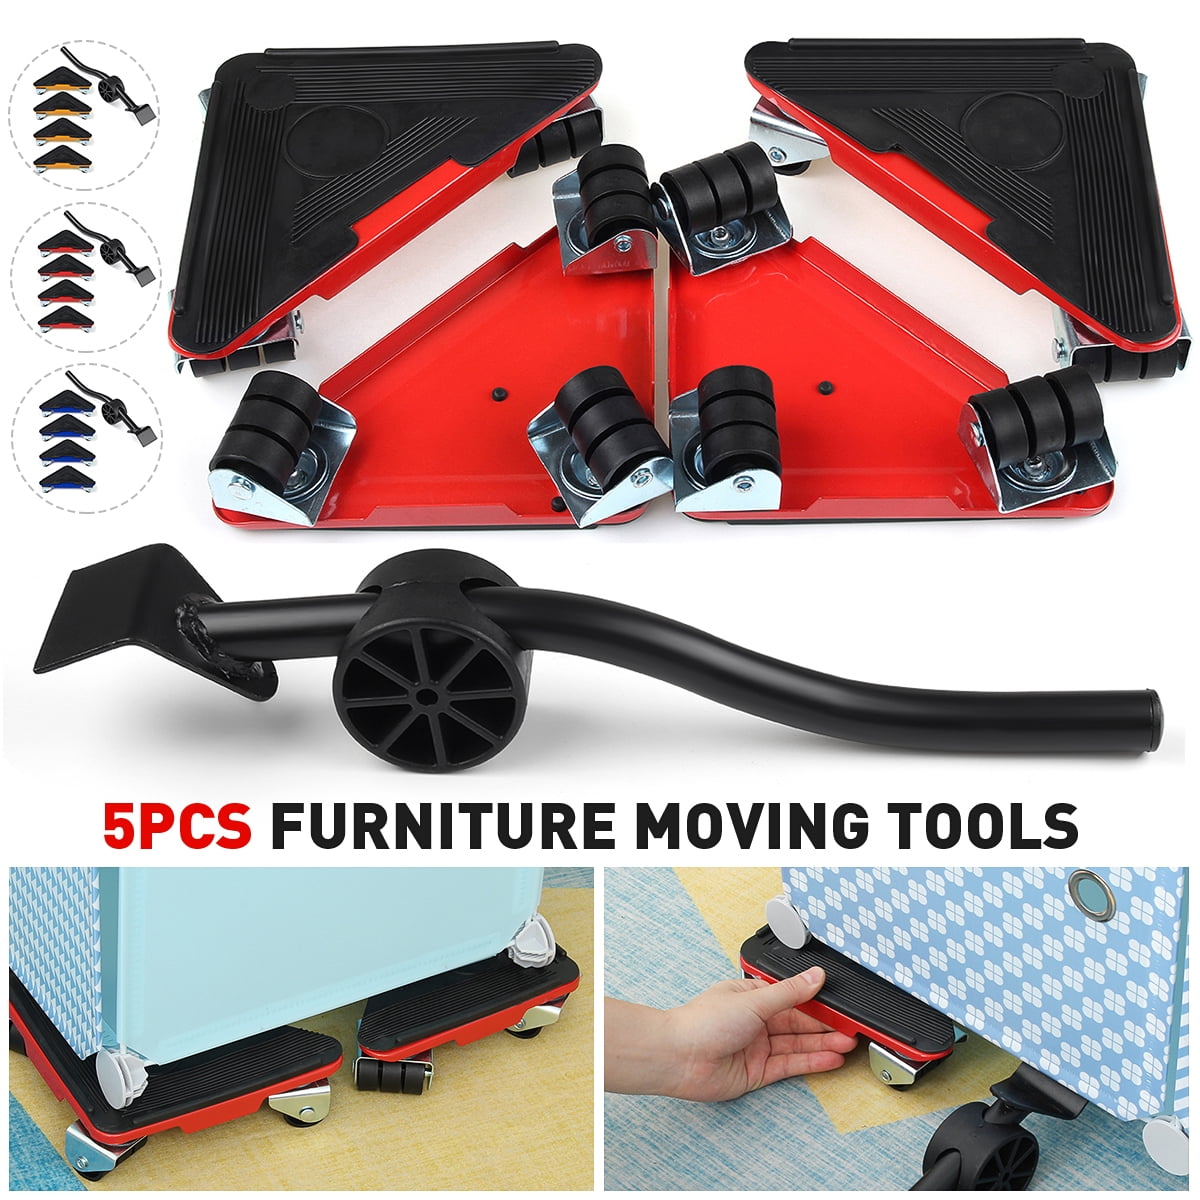 Furniture Lifter with 4 Pack Furniture Slider Furniture Move Tools Up to 440lbs 